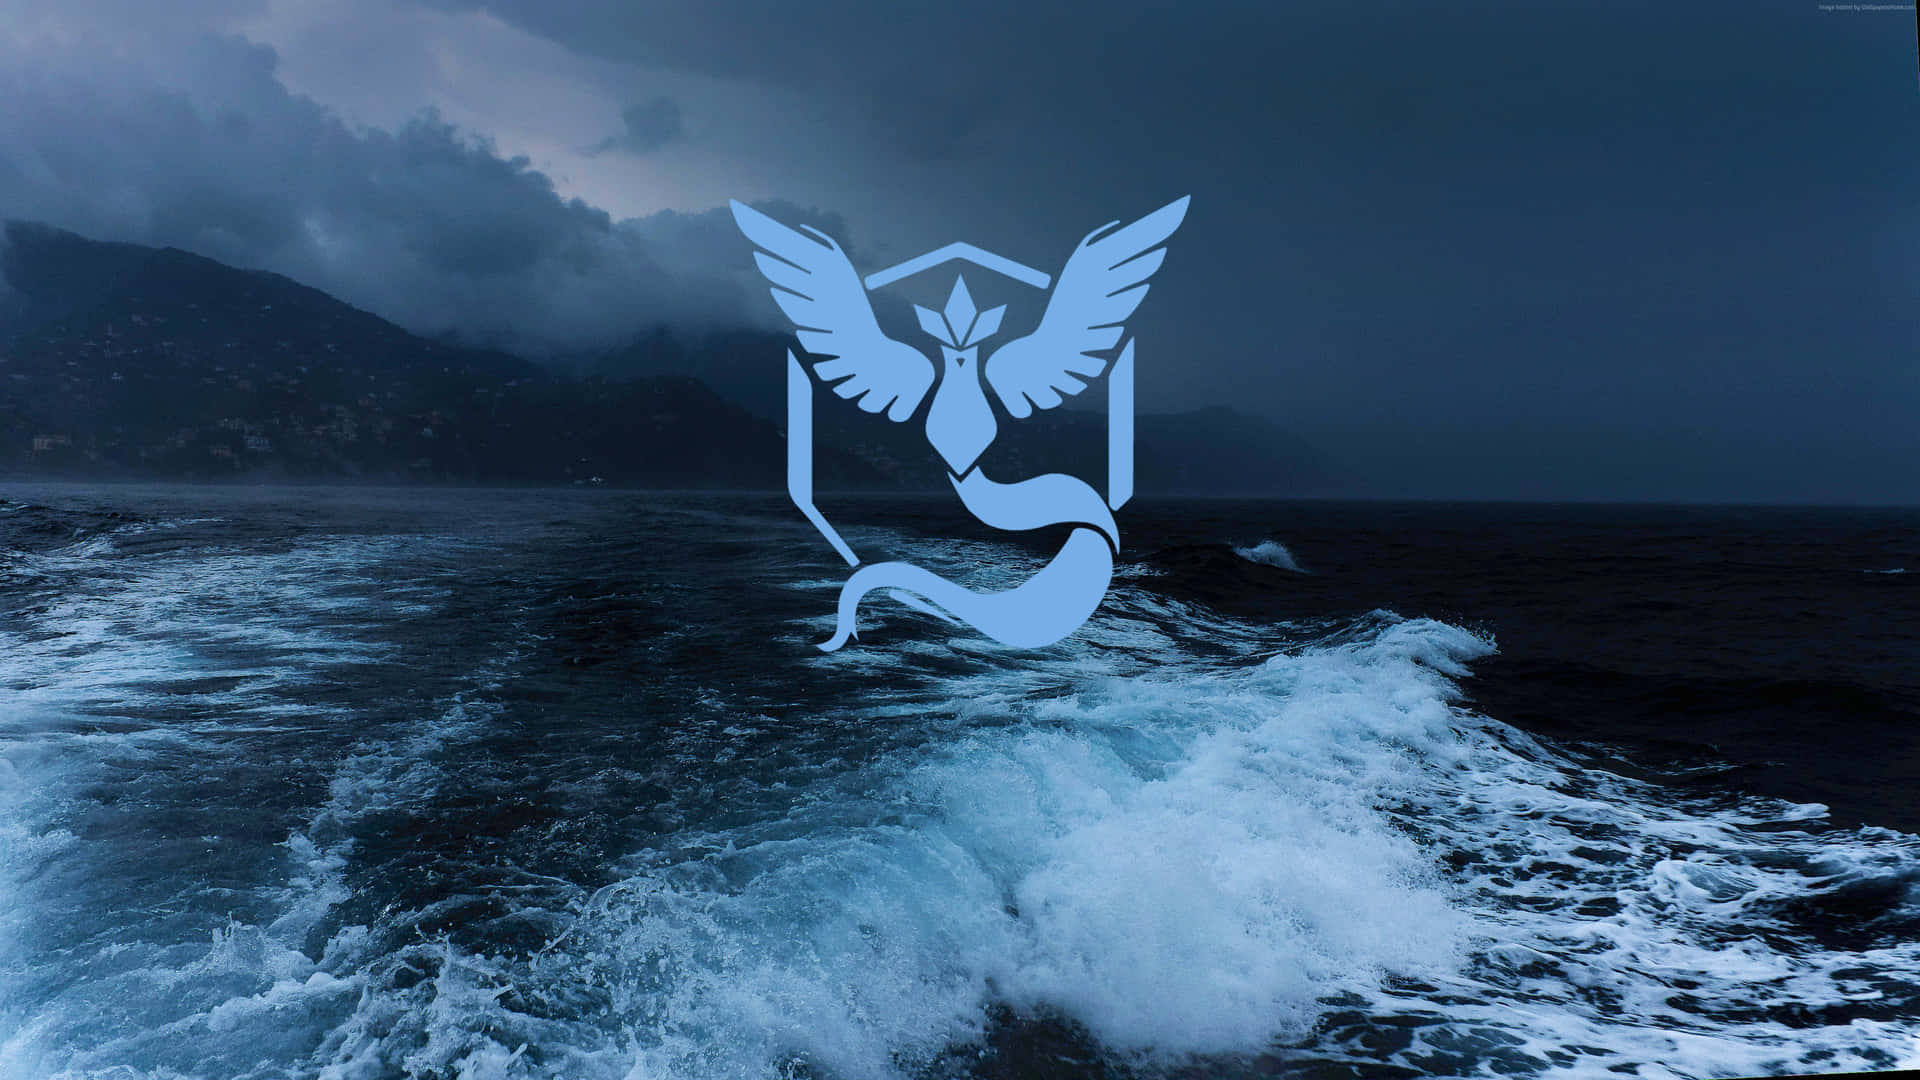 Download Pokemon Logo On A Blue Ocean With Waves Wallpaper